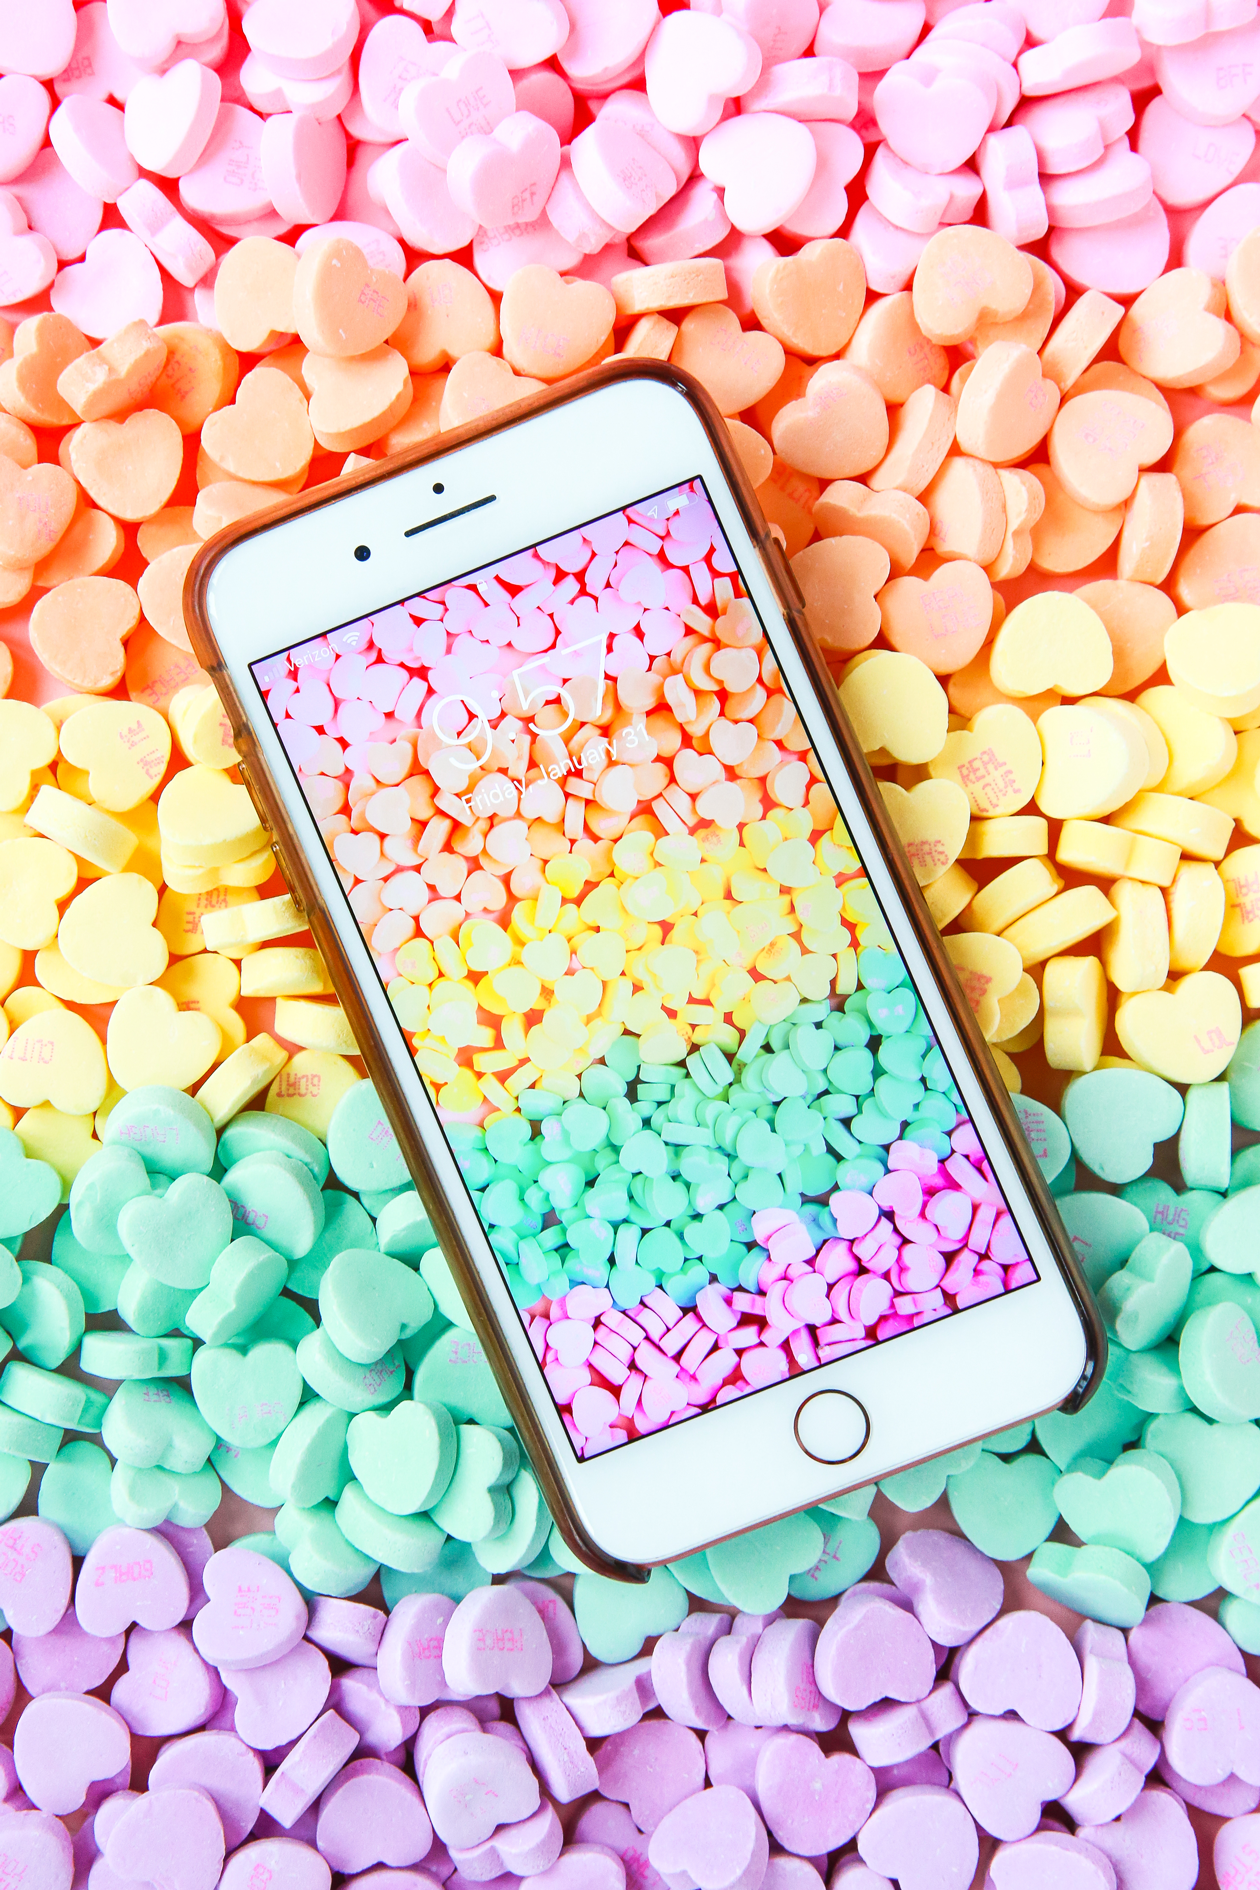 Candy Heart Phone Wallpaper Download